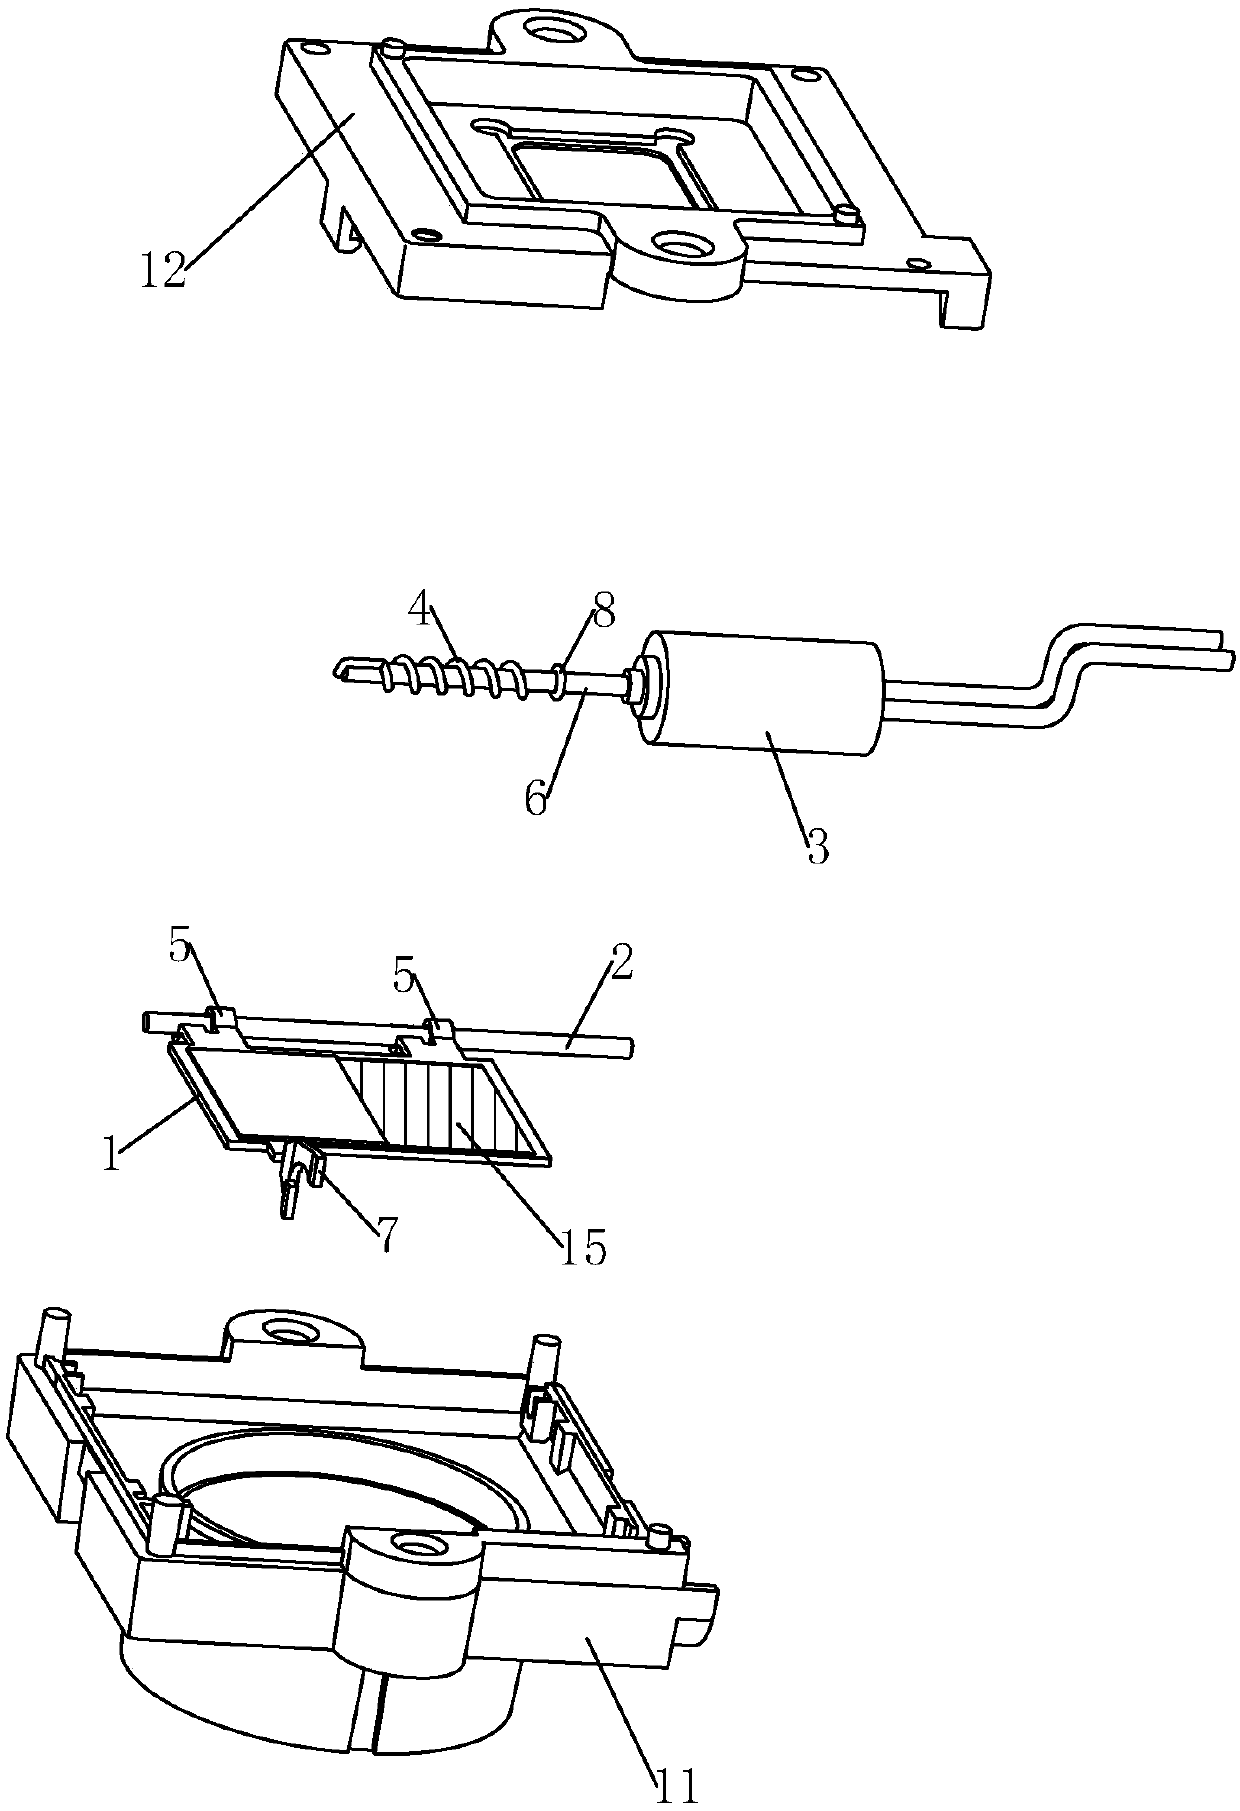 Dual-filter assembly and lens assembly